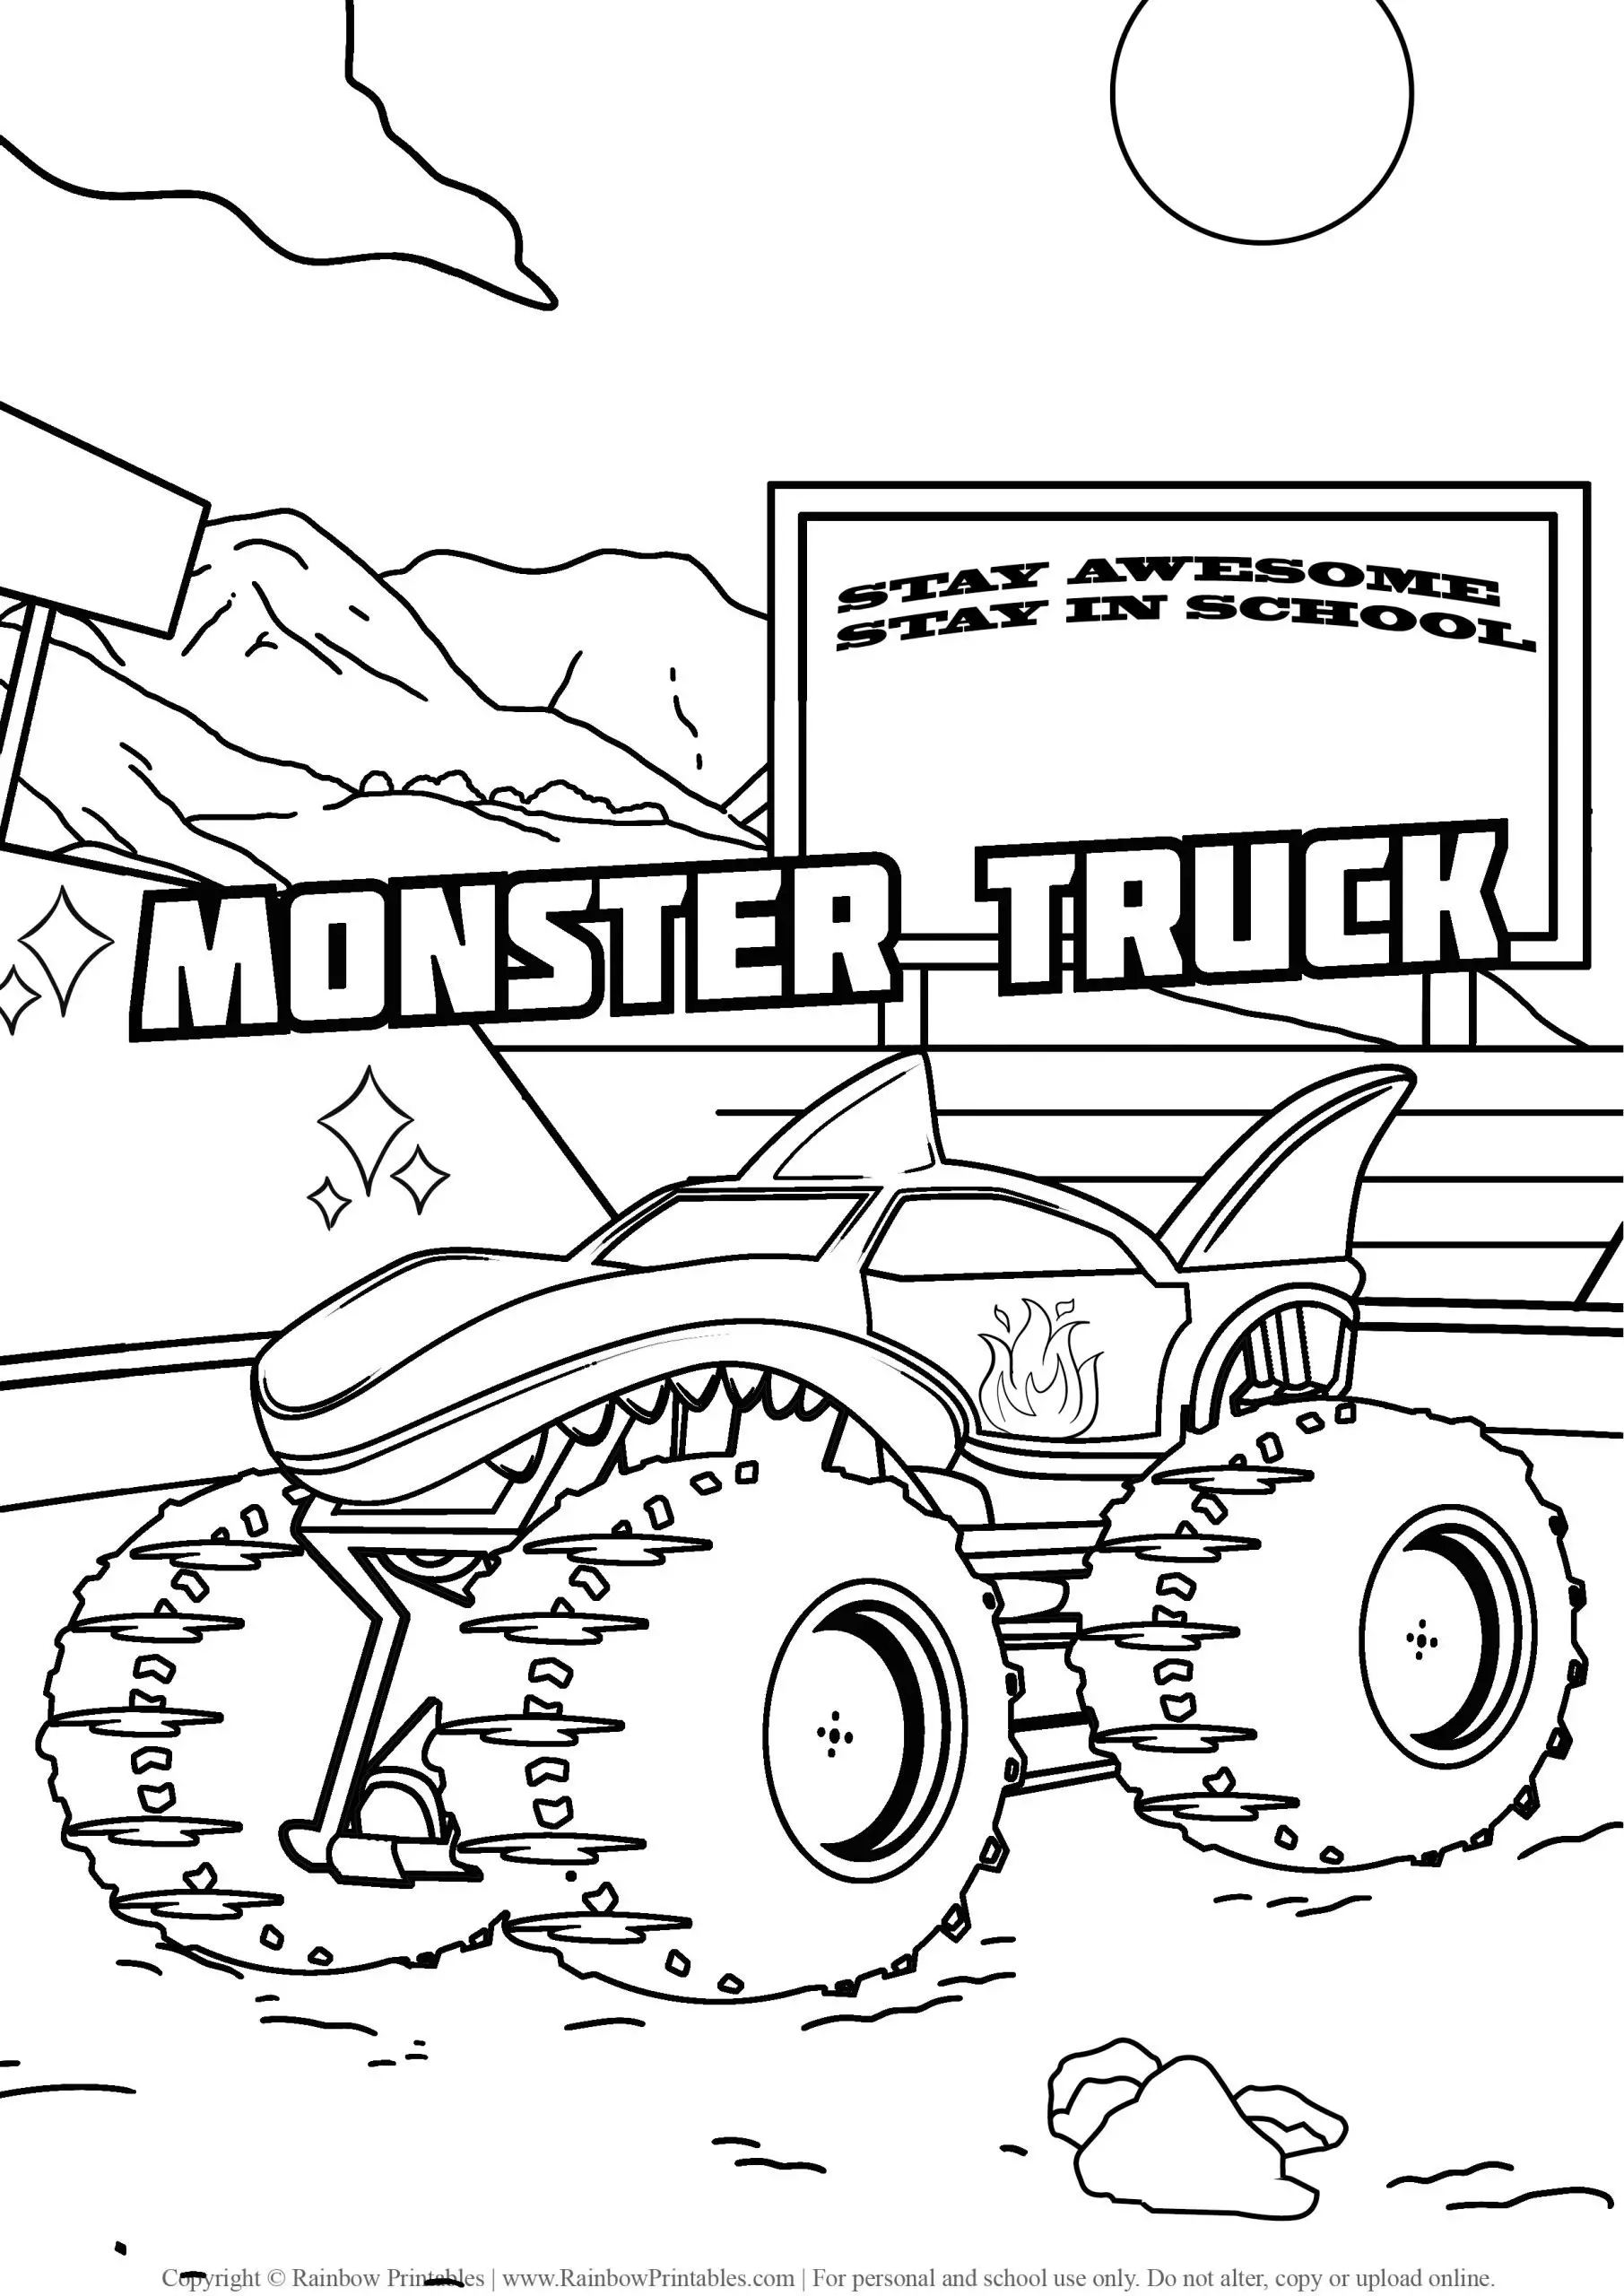 Monster Truck coloring pages, hot wheels, grave digger, jam, games drawing, monster truck party madness, coloring pages for boys, FREE, USA America illustration